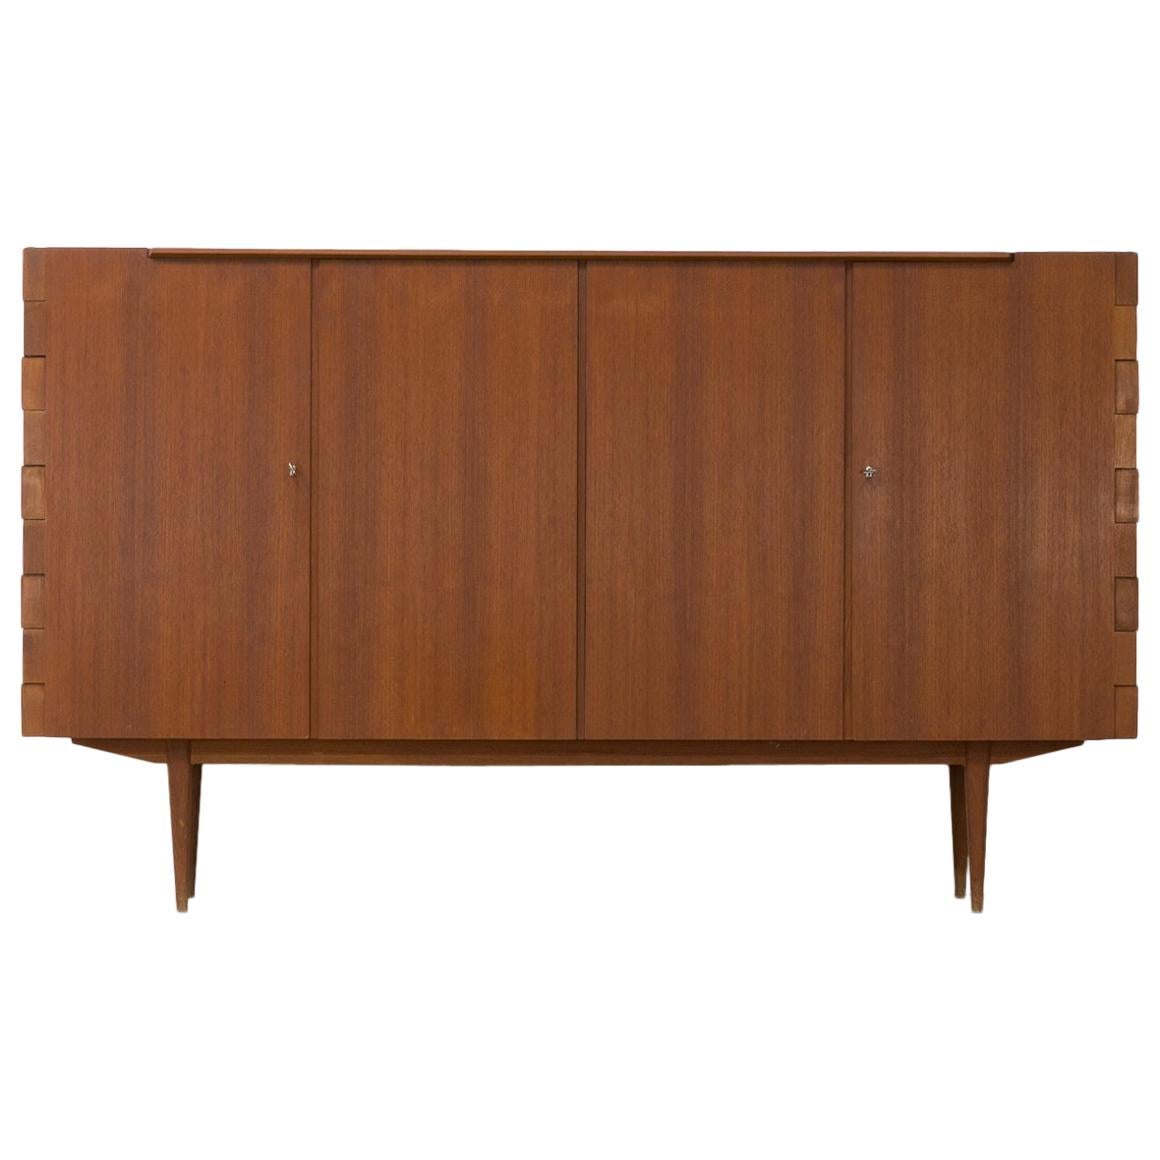 1960s Very Rare Teak High Sideboard with Hinge-Joints For Sale